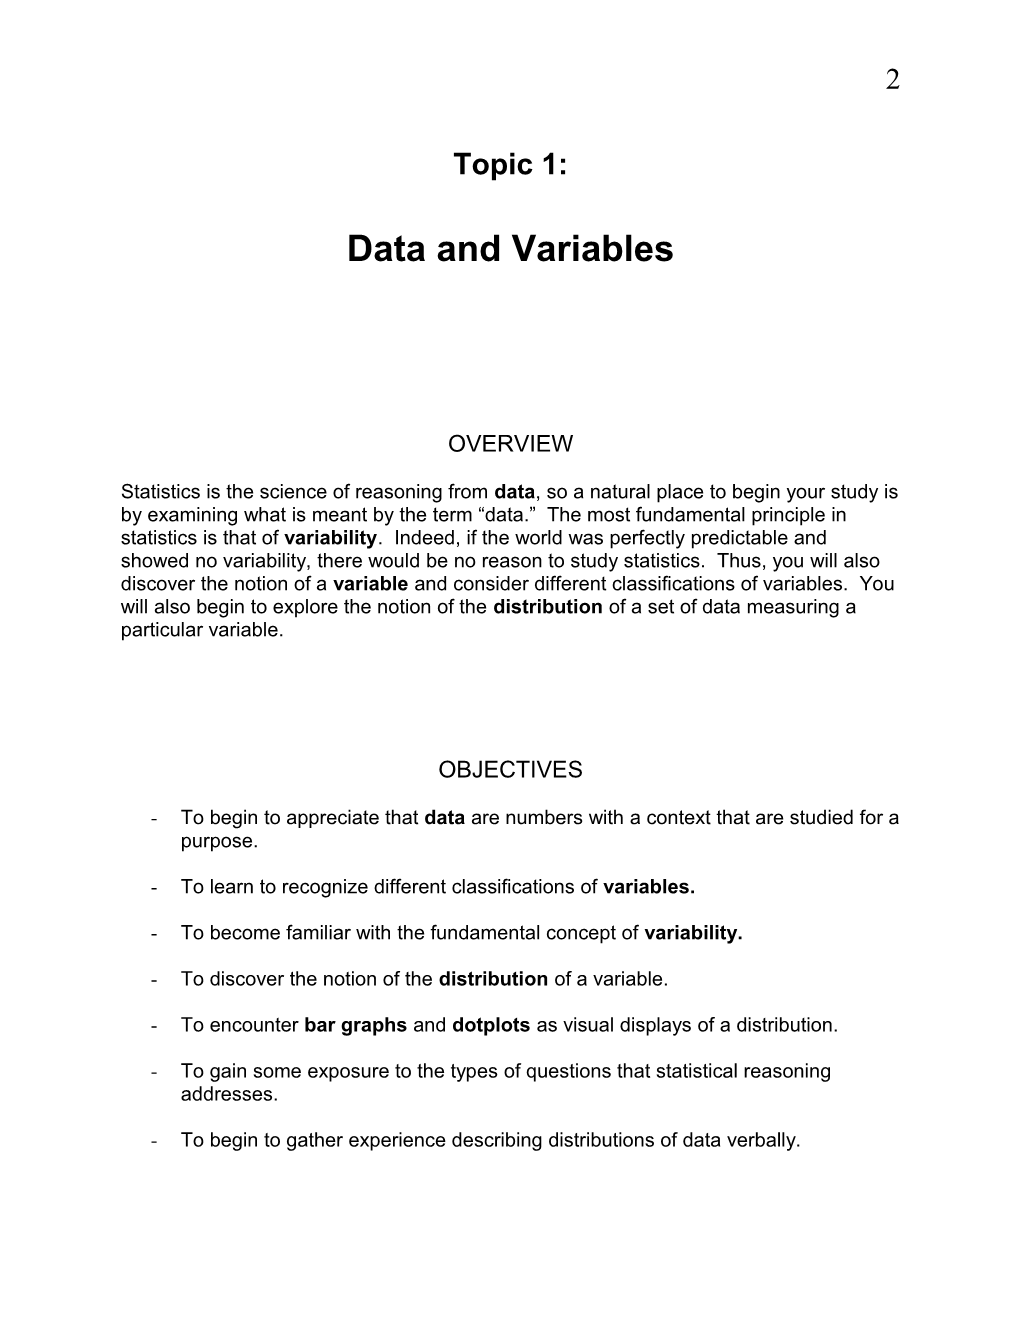 Data and Variables